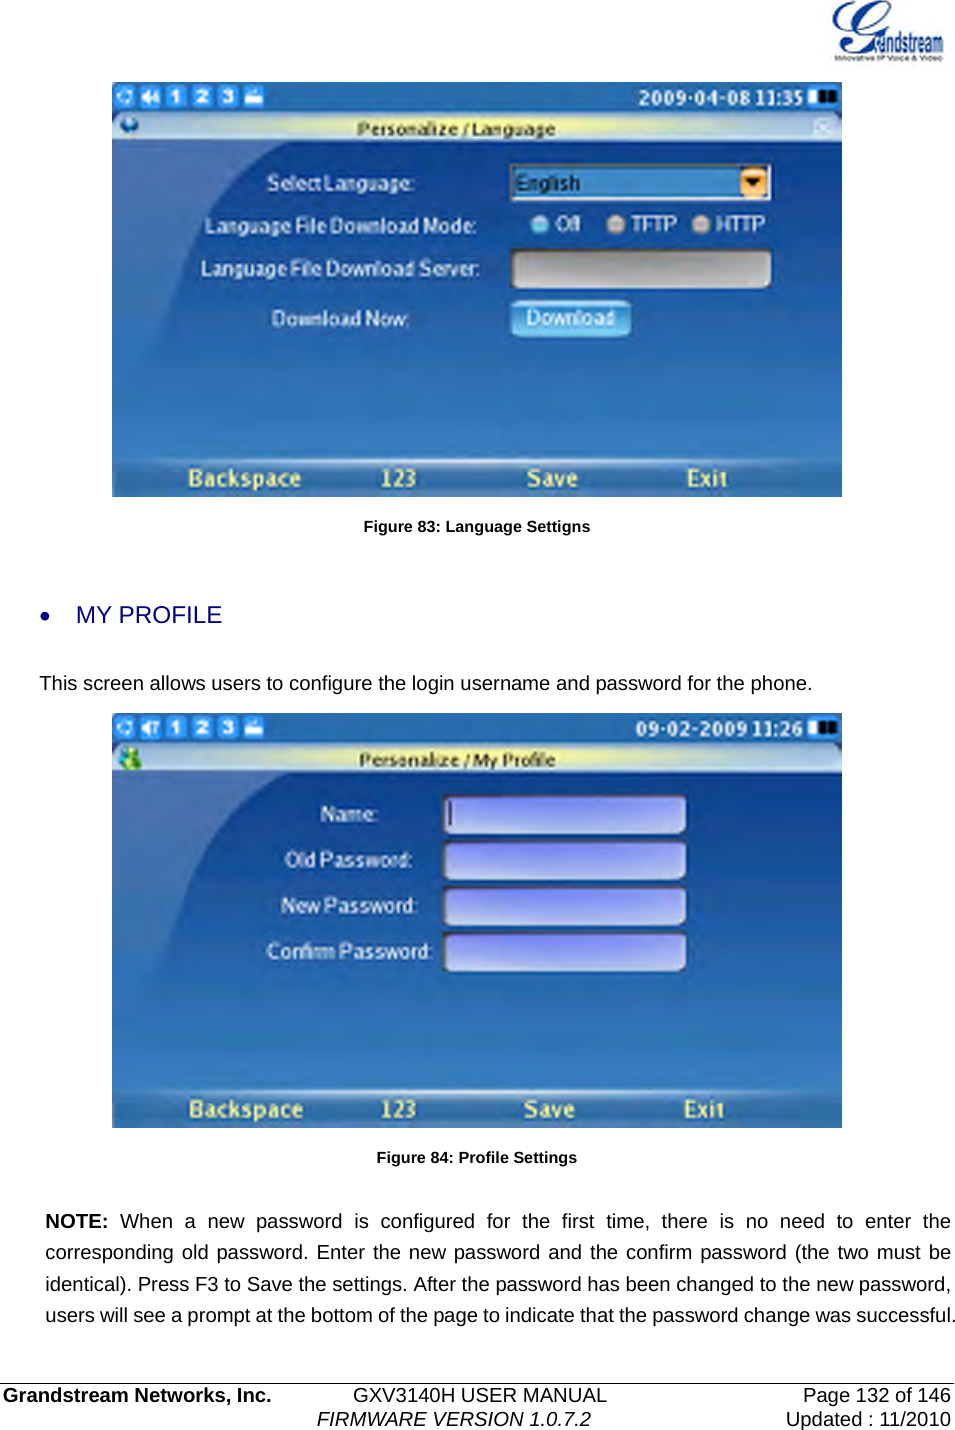   Grandstream Networks, Inc.        GXV3140H USER MANUAL                  Page 132 of 146                                FIRMWARE VERSION 1.0.7.2 Updated : 11/2010   Figure 83: Language Settigns  • MY PROFILE This screen allows users to configure the login username and password for the phone.    Figure 84: Profile Settings  NOTE: When a new password is configured for the first time, there is no need to enter the corresponding old password. Enter the new password and the confirm password (the two must be identical). Press F3 to Save the settings. After the password has been changed to the new password, users will see a prompt at the bottom of the page to indicate that the password change was successful. 